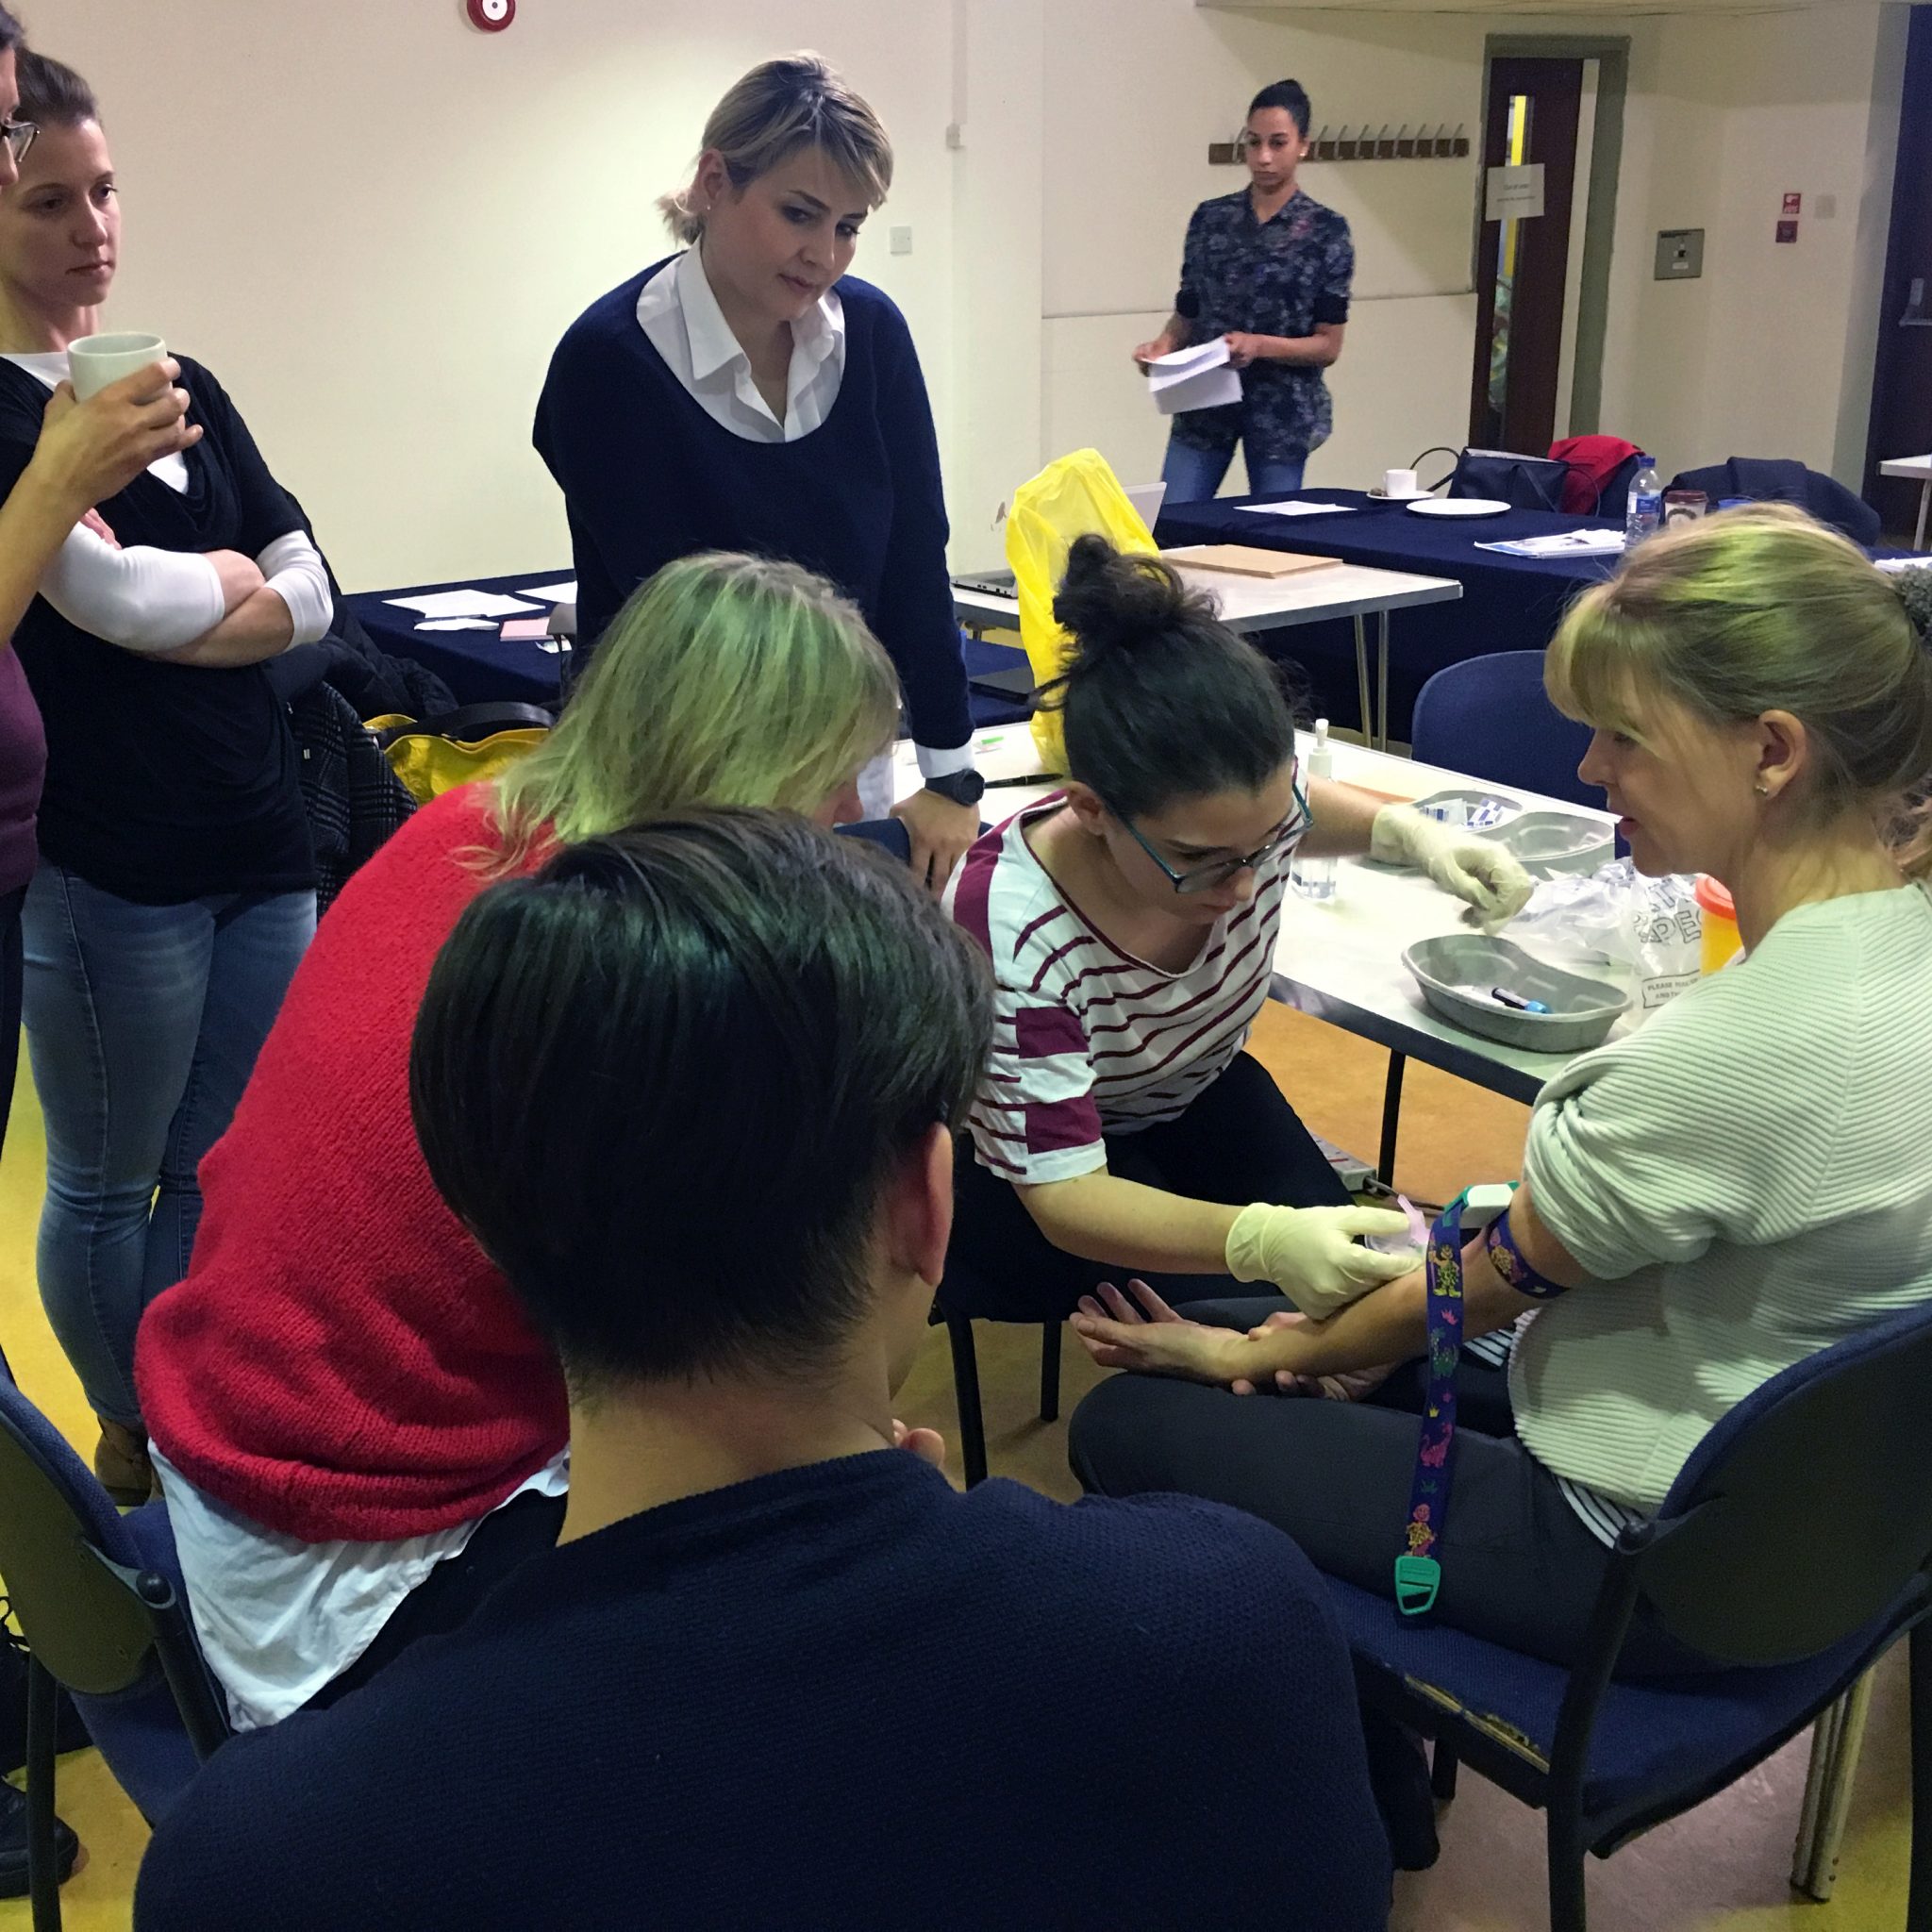 NHS Phlebotomy Training for Beginners